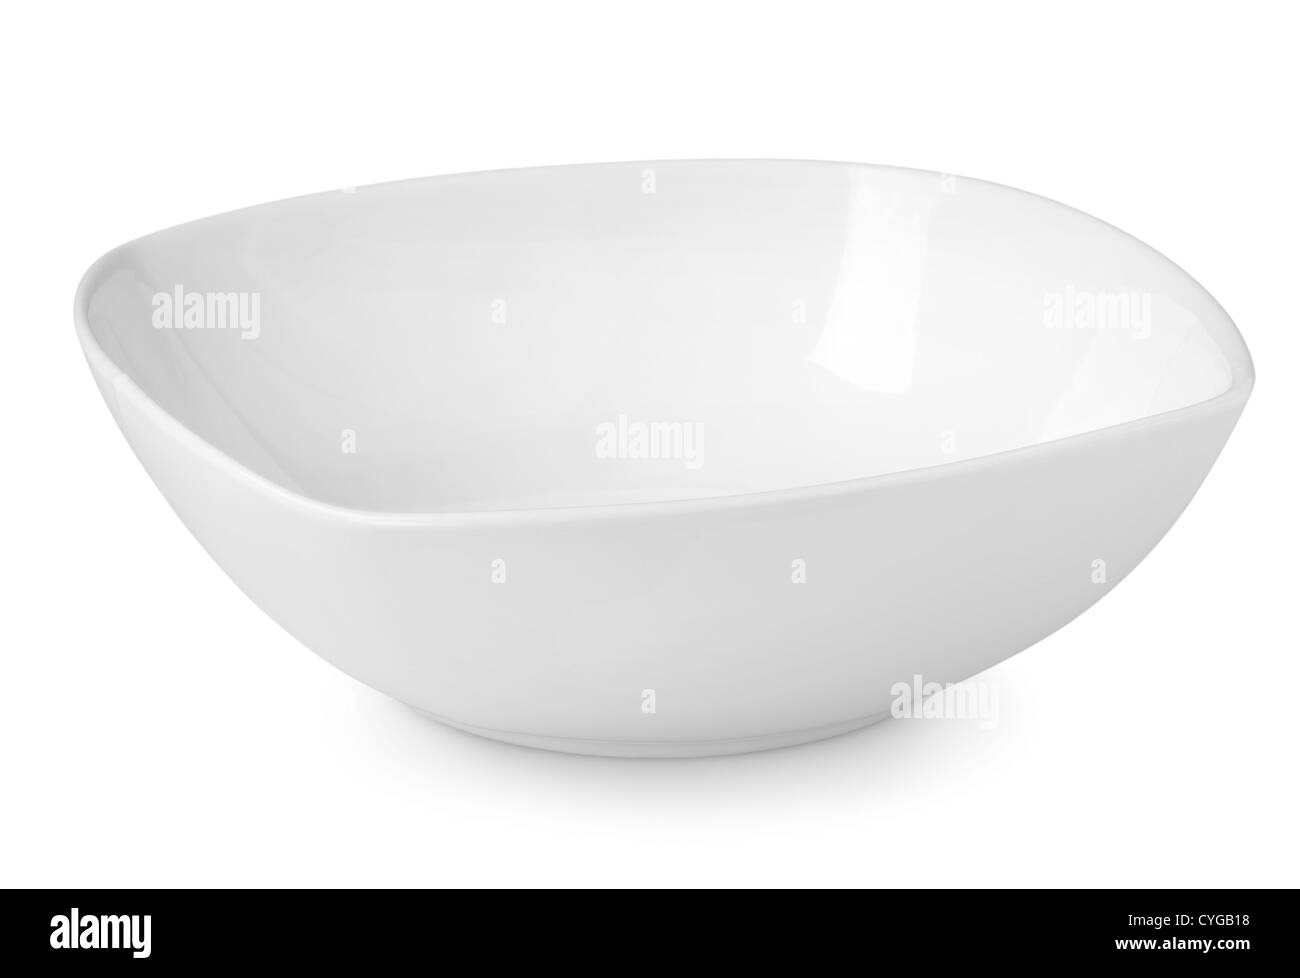 Plate for salad isolated on a white background Stock Photo